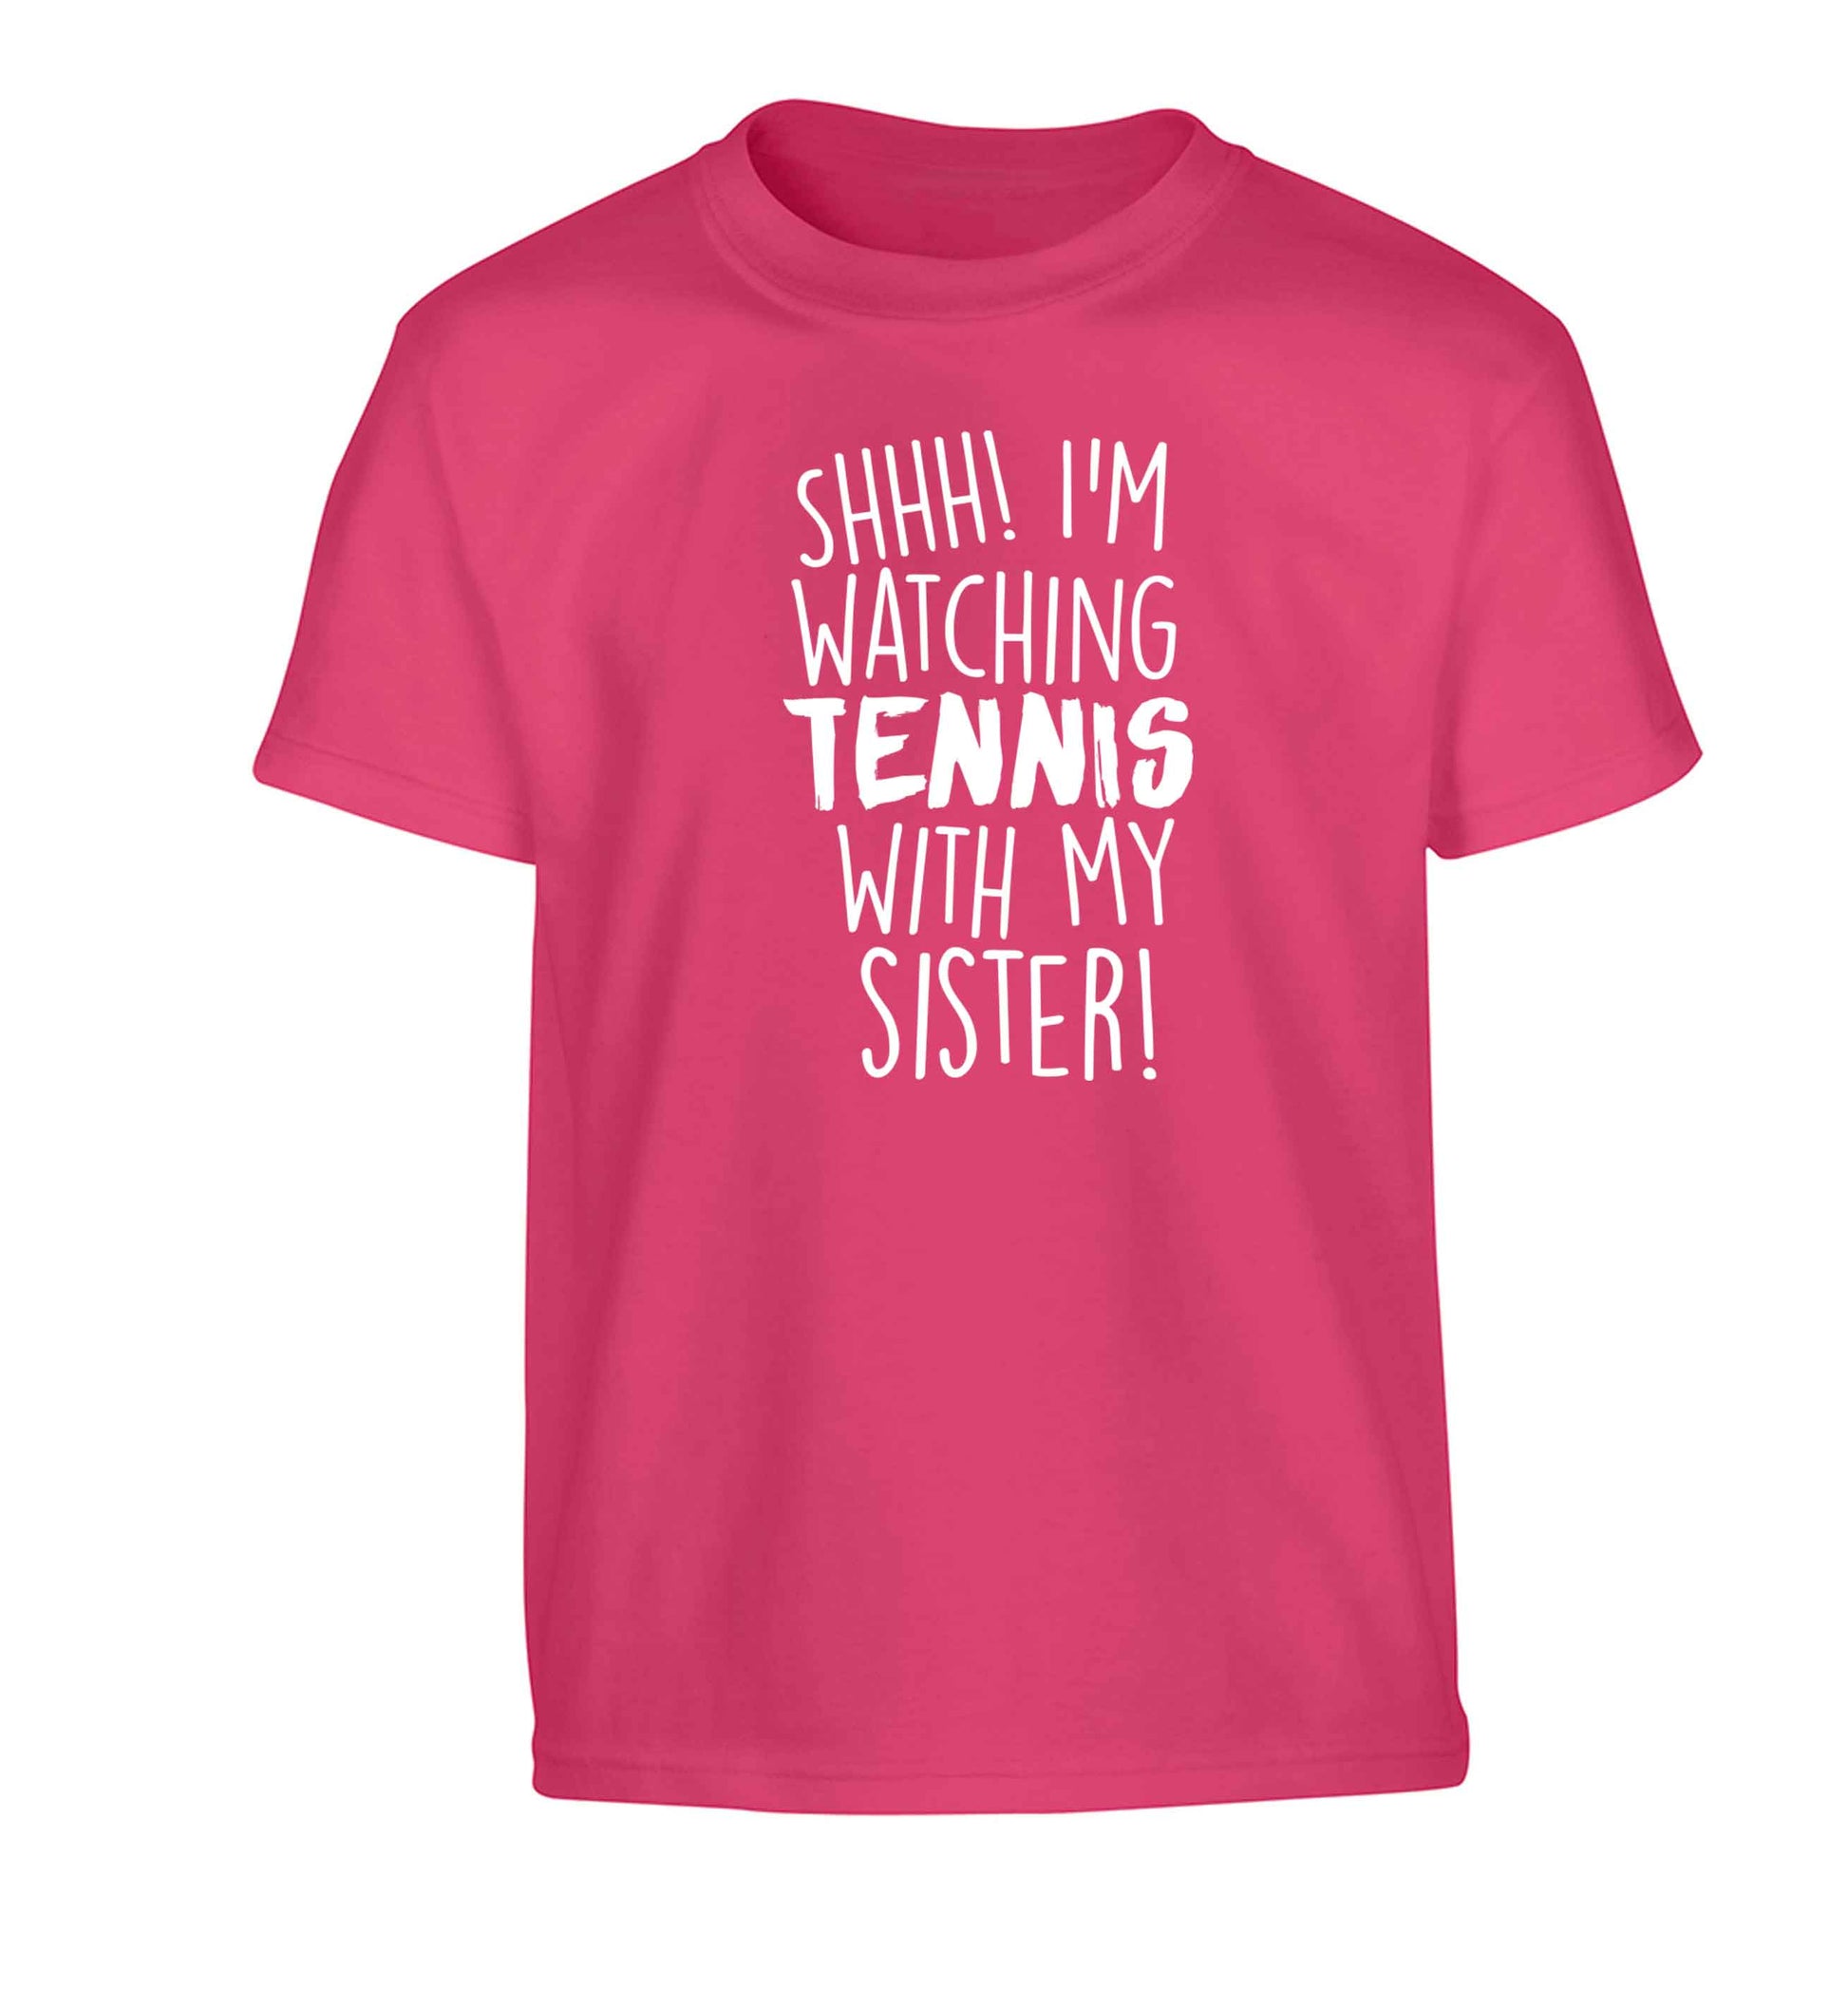 Shh! I'm watching tennis with my sister! Children's pink Tshirt 12-13 Years